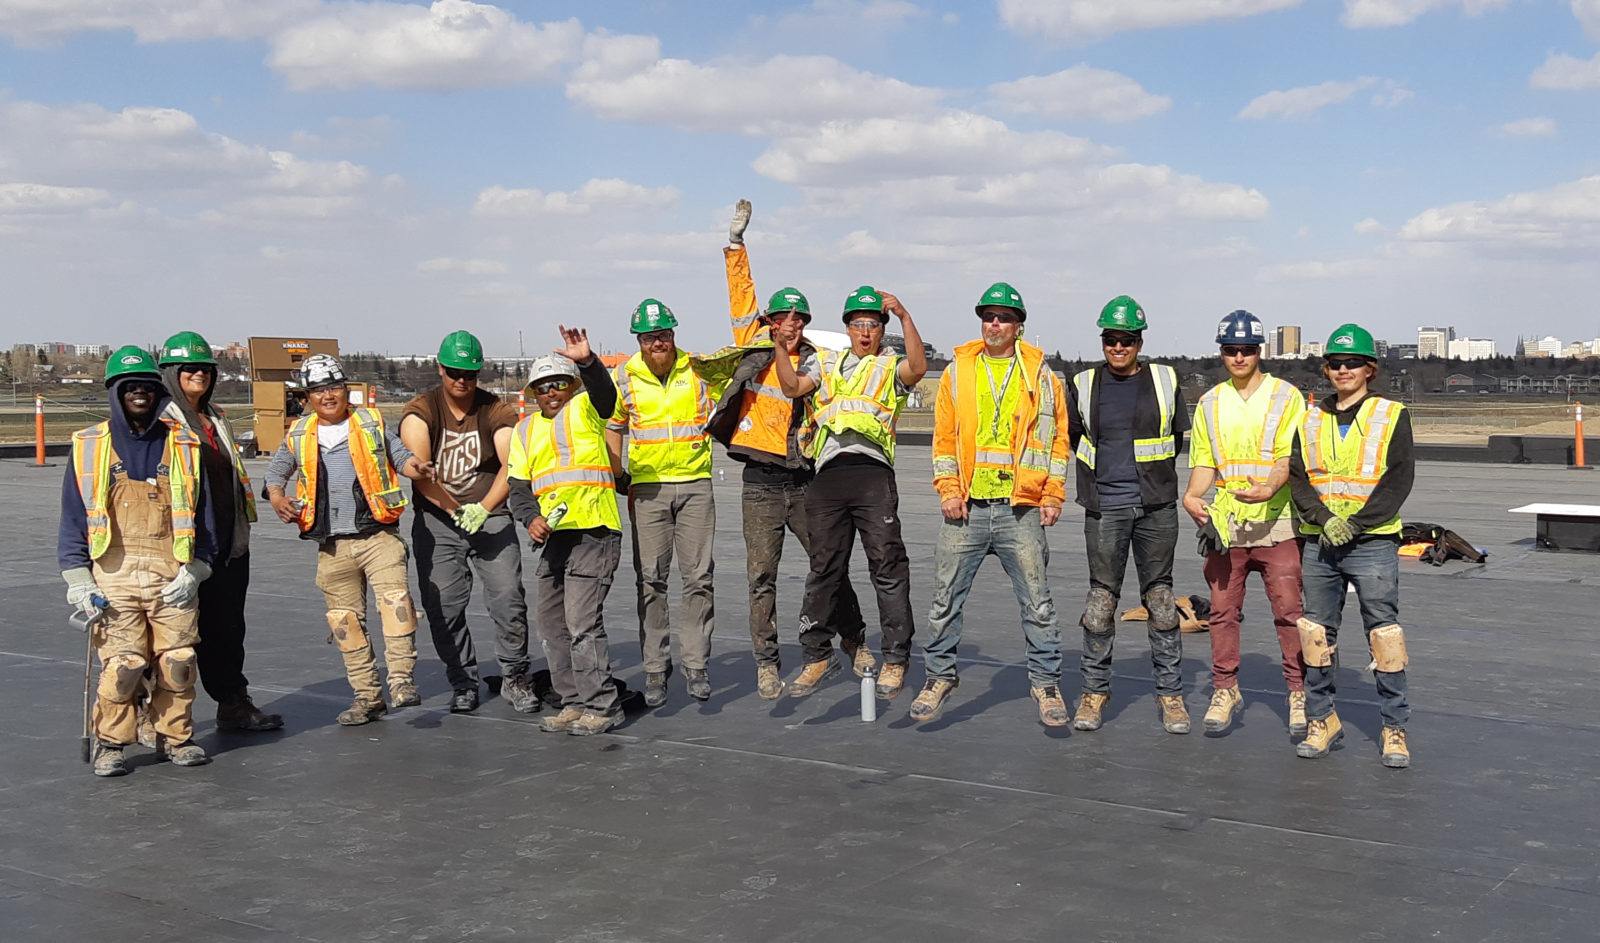 Flynn Roofing crew jumping in the air